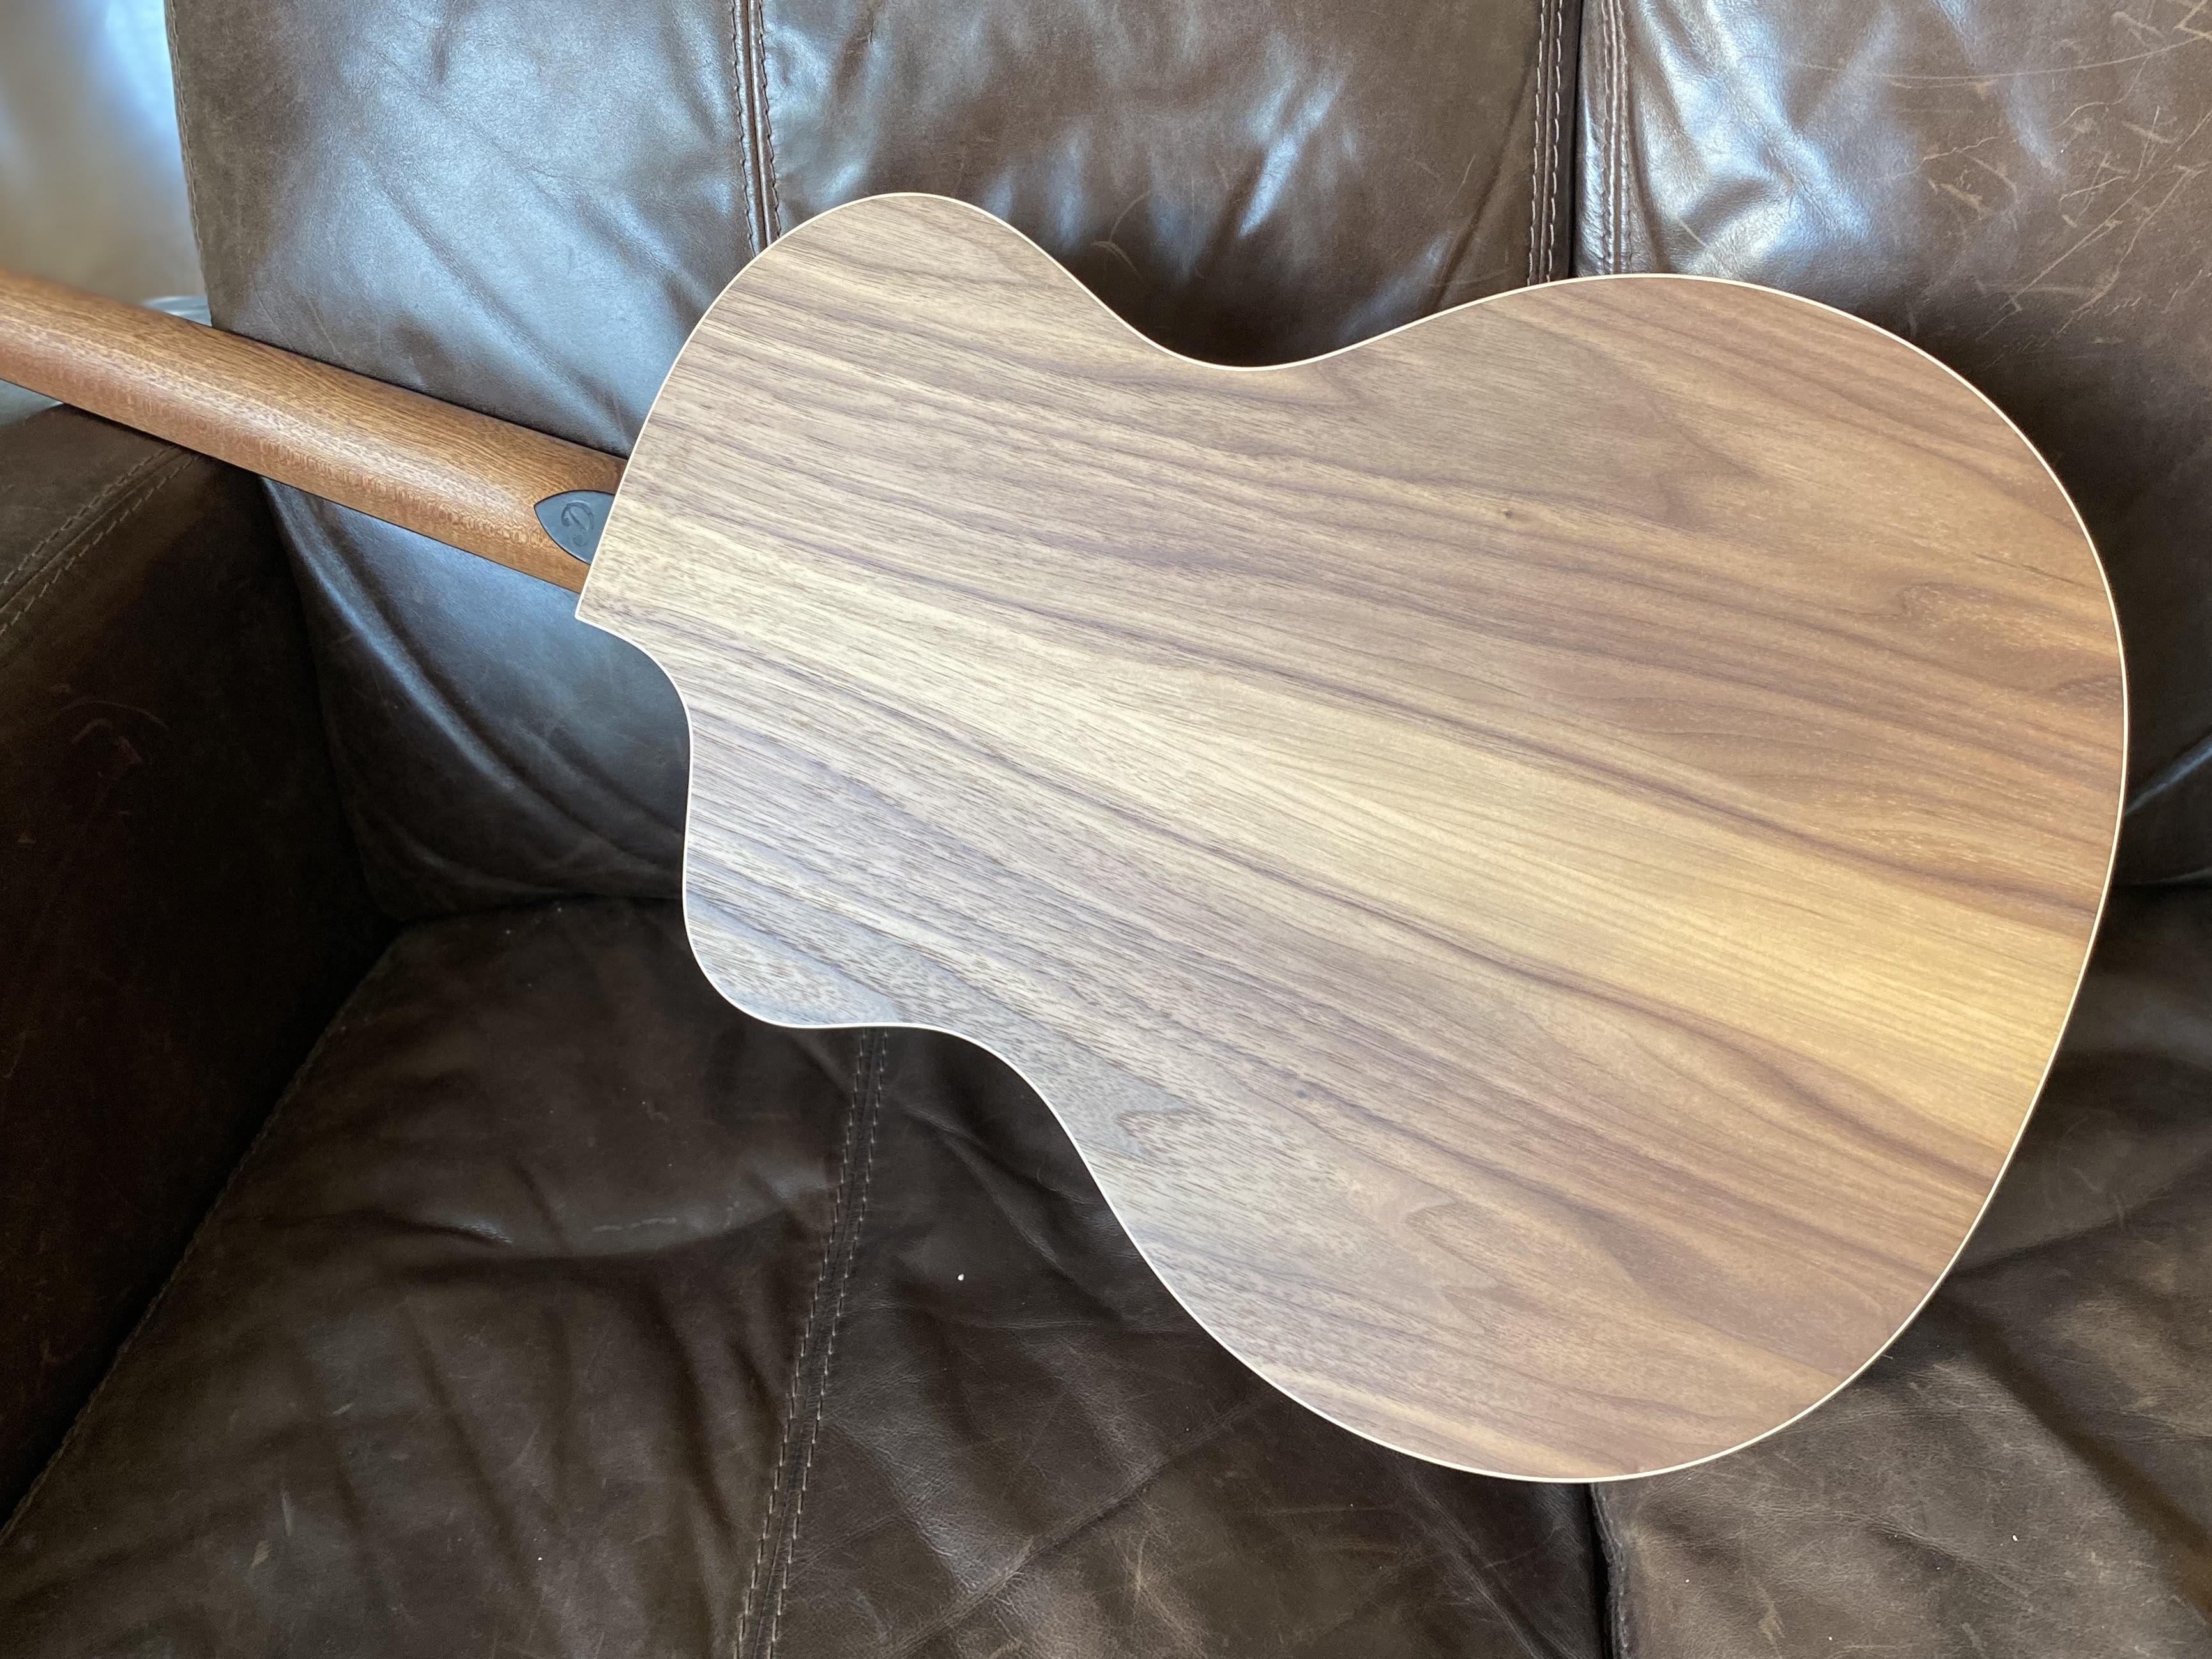 Dowina Walnut (Sol) JC, Acoustic Guitar for sale at Richards Guitars.